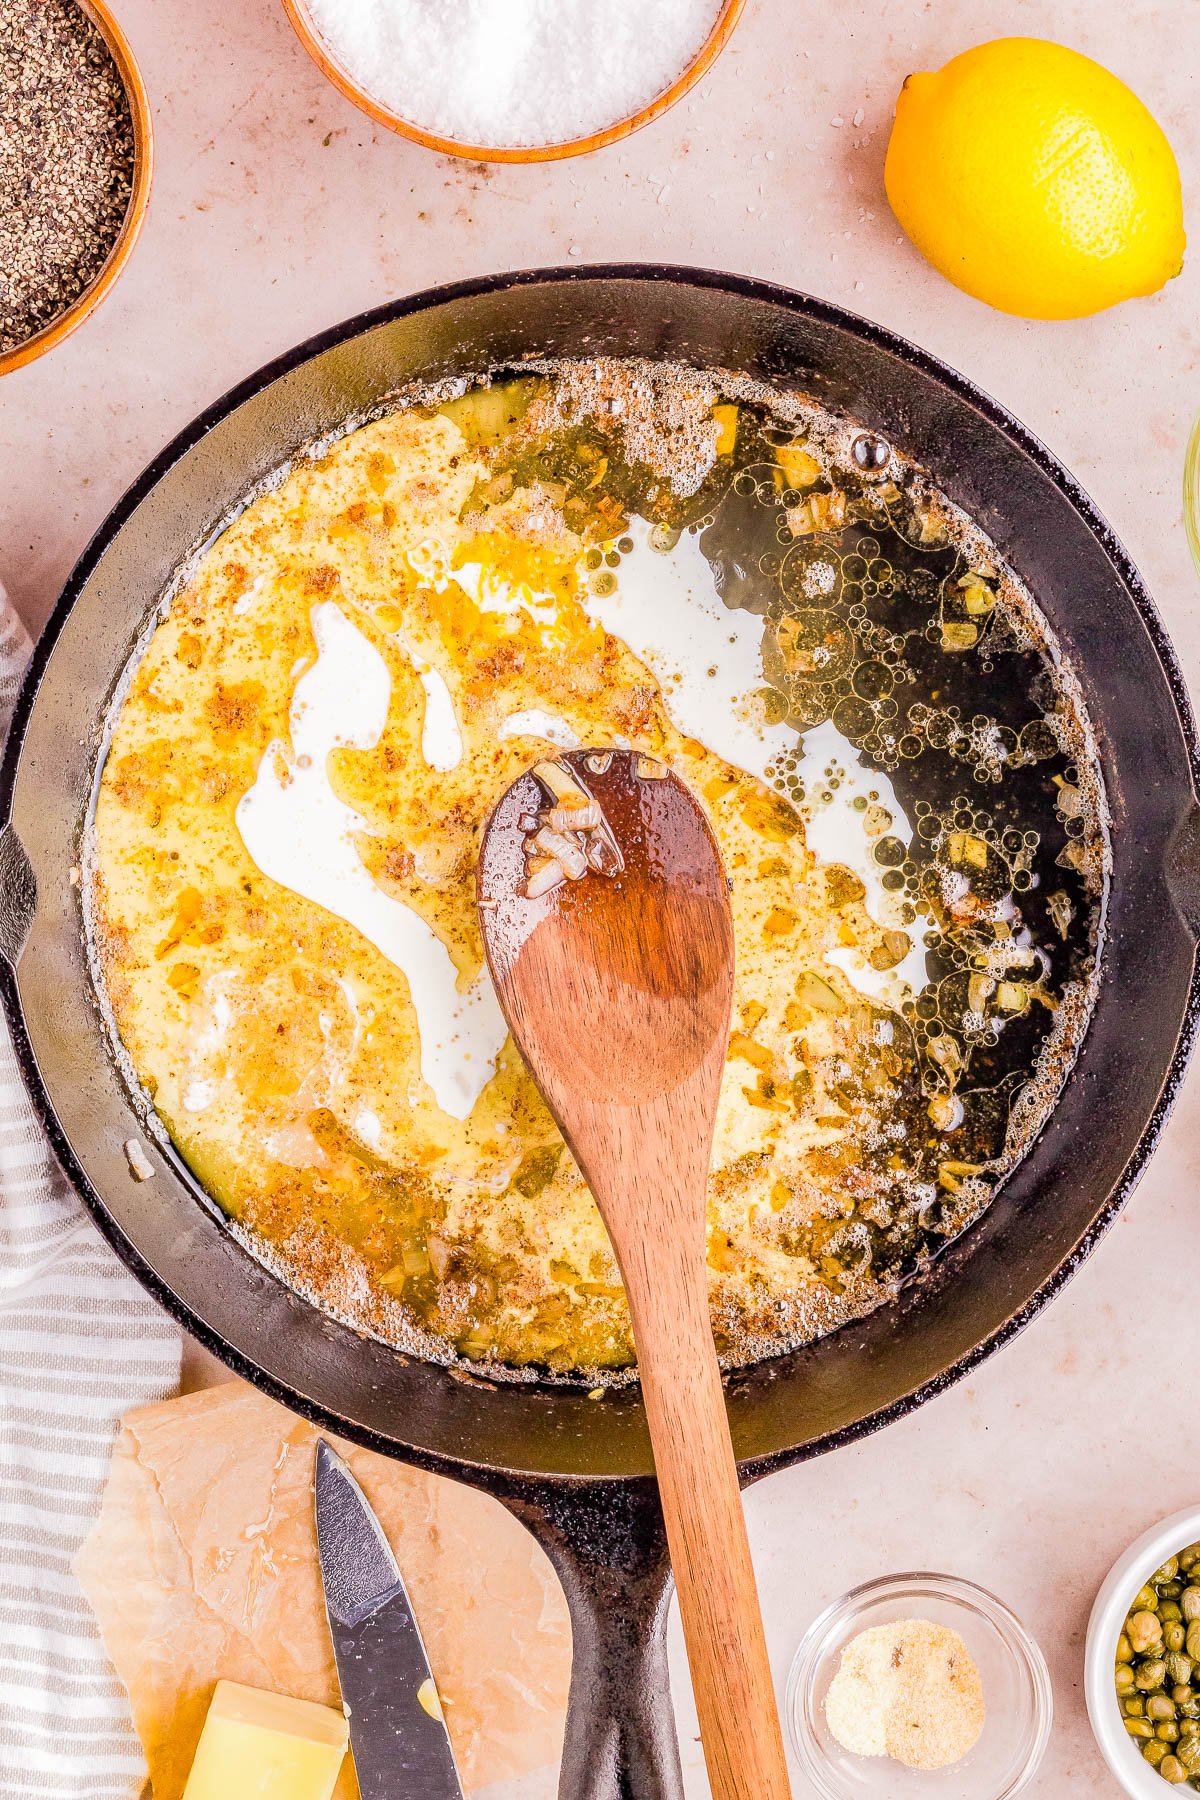 A wooden spoon resting in a skillet with bubbling butter, surrounded by ingredients like lemon, capers, and seasonings.